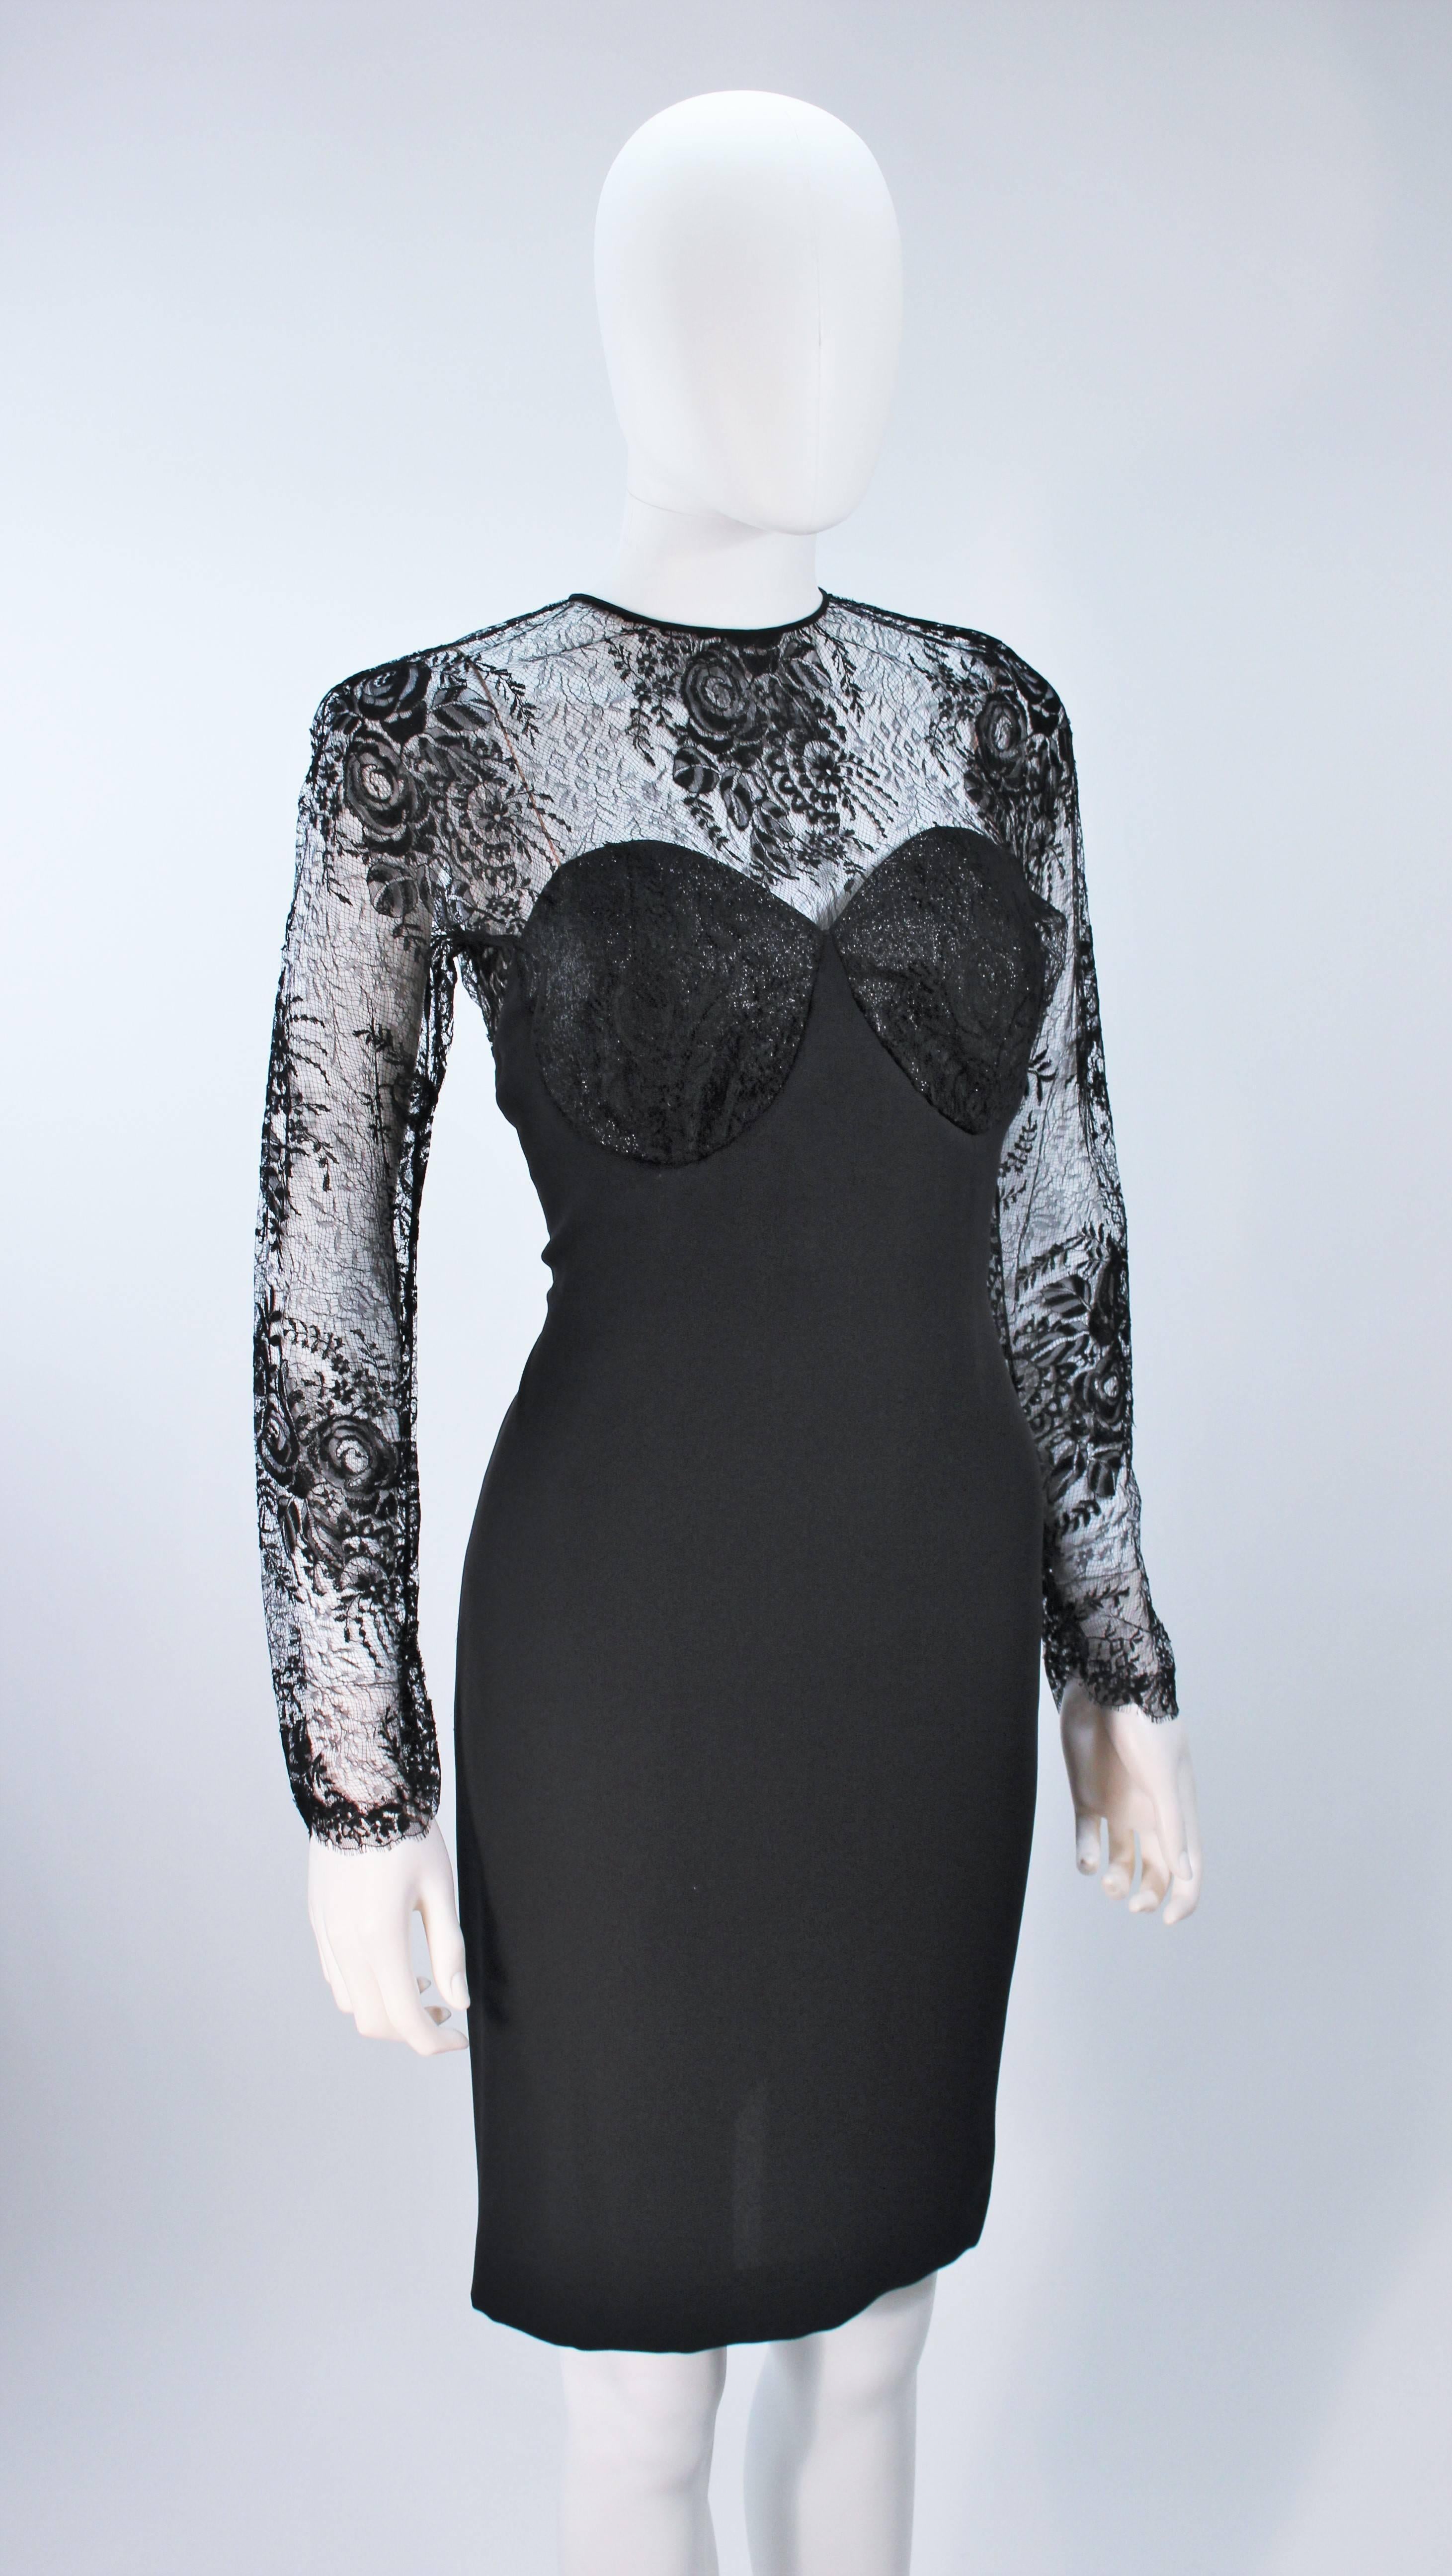 GALANOS Black Lace Cocktail Dress with Metallic Accents Size 8-10 1